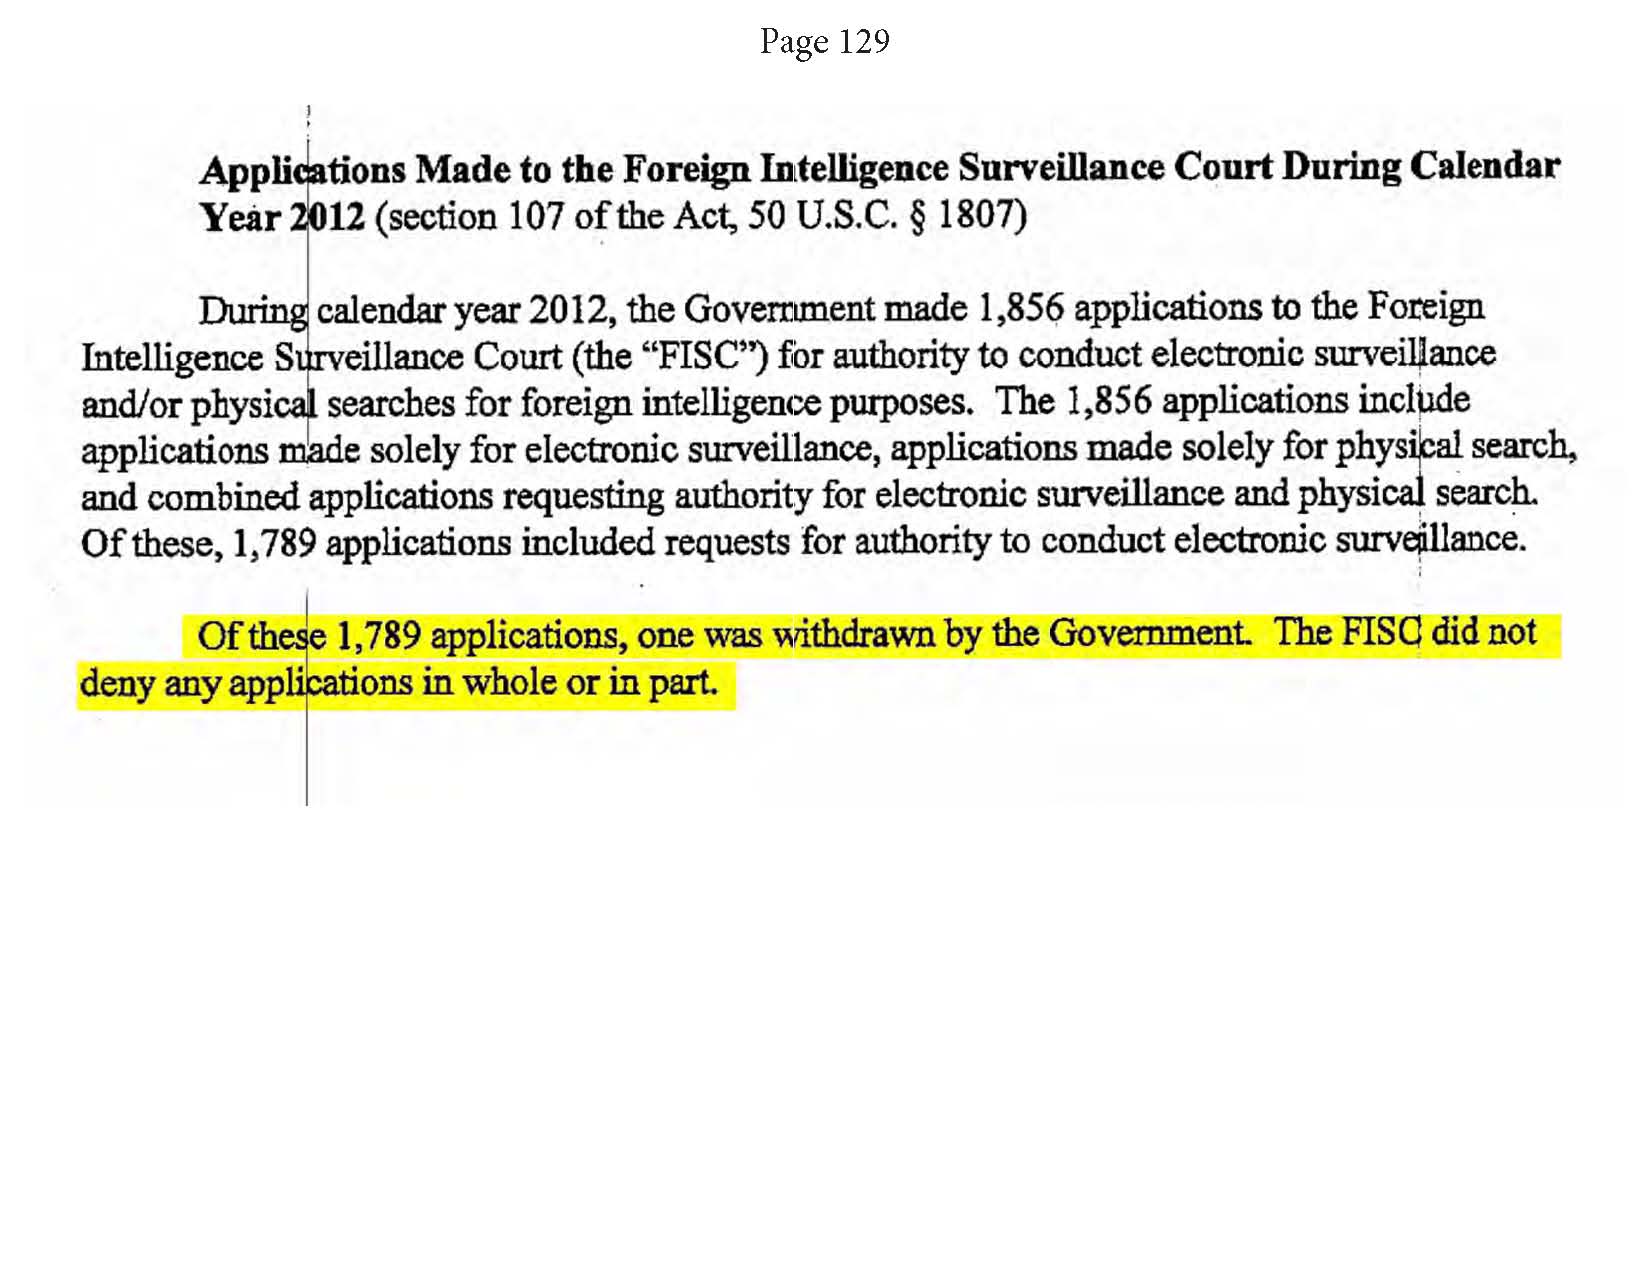 Greenwald. (May 14, 2014). Snowden NSA archive Documents from No Place to Hide, PDF page 42. Glenn Greenwald / MacMillian. (Glenn Greenwald, p. 129: "Of these 1,789 [FISA Court] applications, one was withdrawn by the Government. The FISC did not deny any applications in whole or in part.").